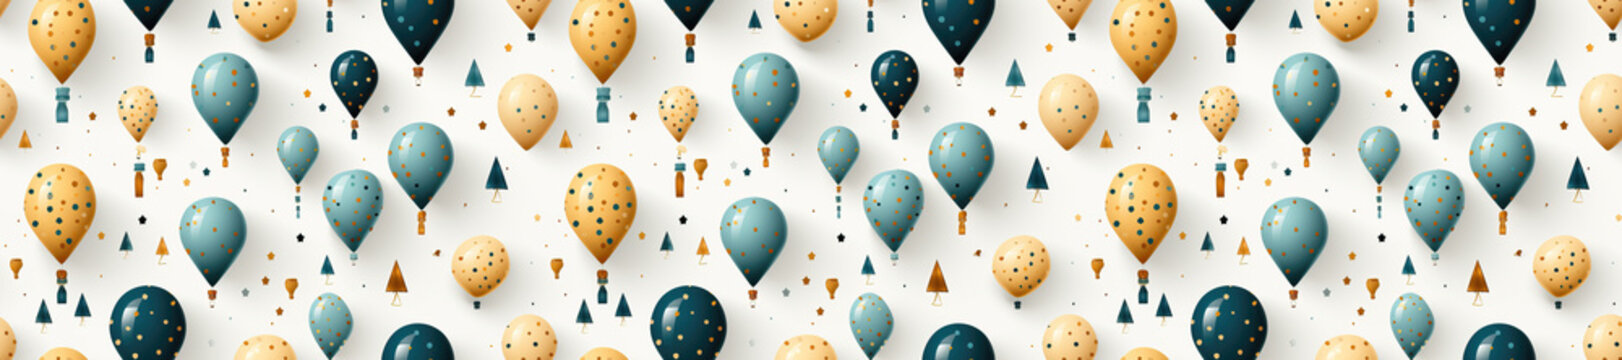 Seamless. A wide-format festive background image featuring balloons against a white background, making it suitable for various festive occasions and content. Illustration